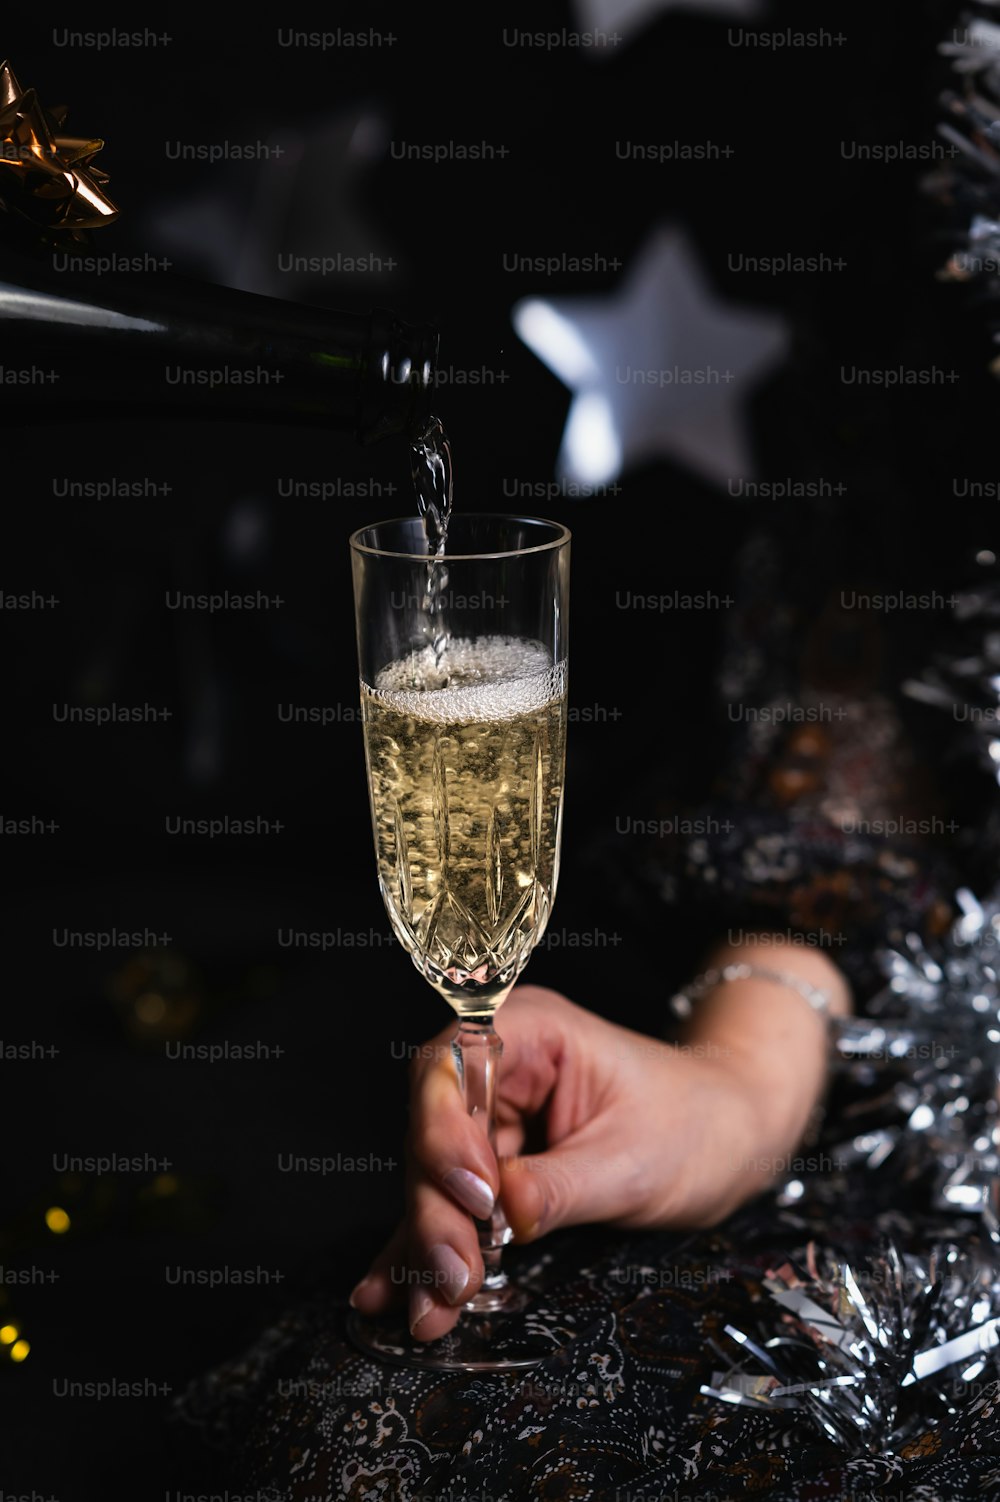 a person is holding a glass of champagne